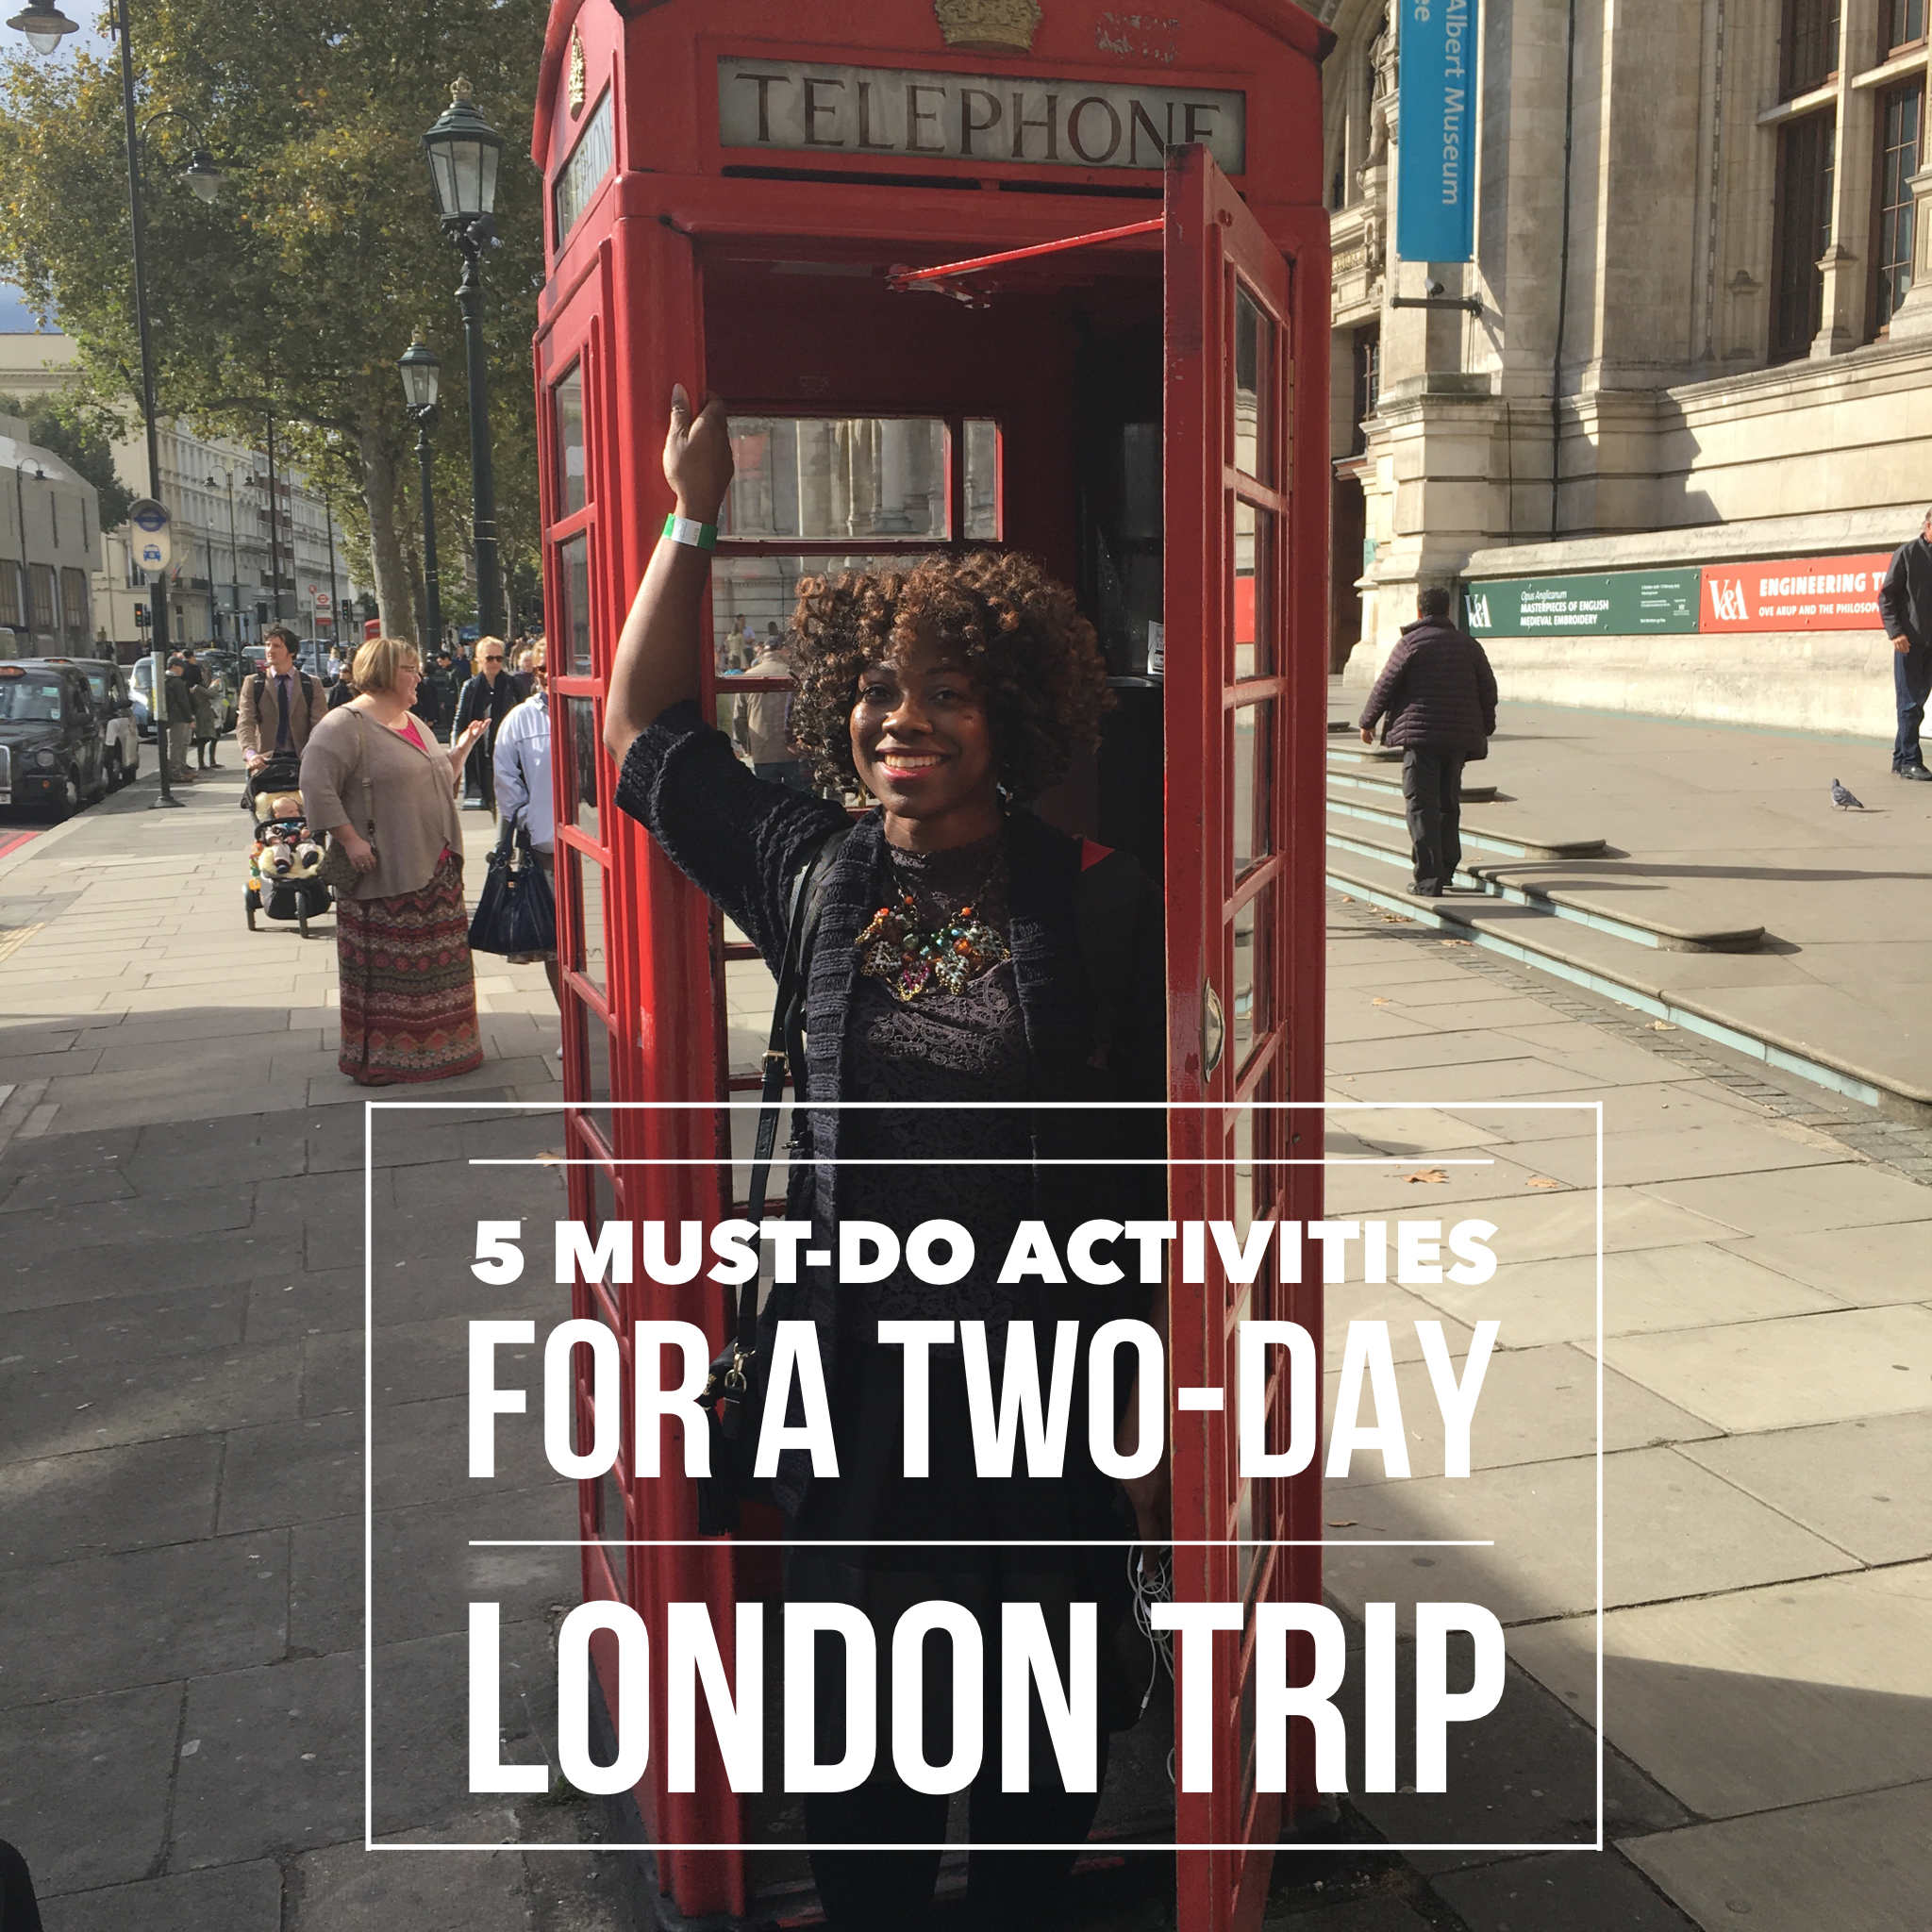 5 Must-Do Activities for a Two-Day London Trip